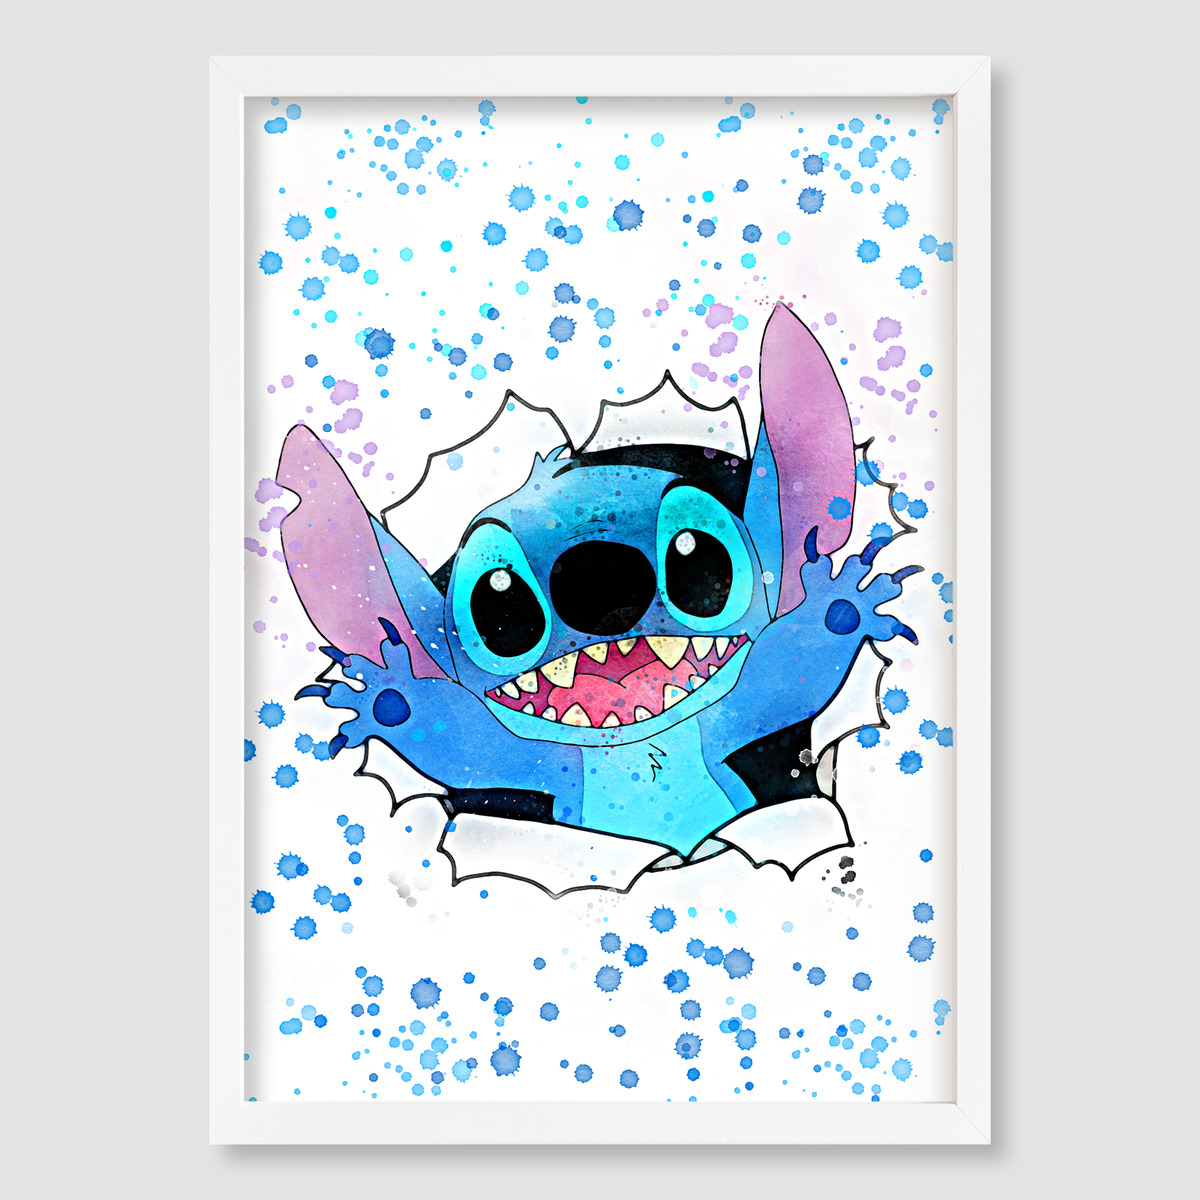 Lilo and Stitch - Lilo And Stitch - Posters and Art Prints